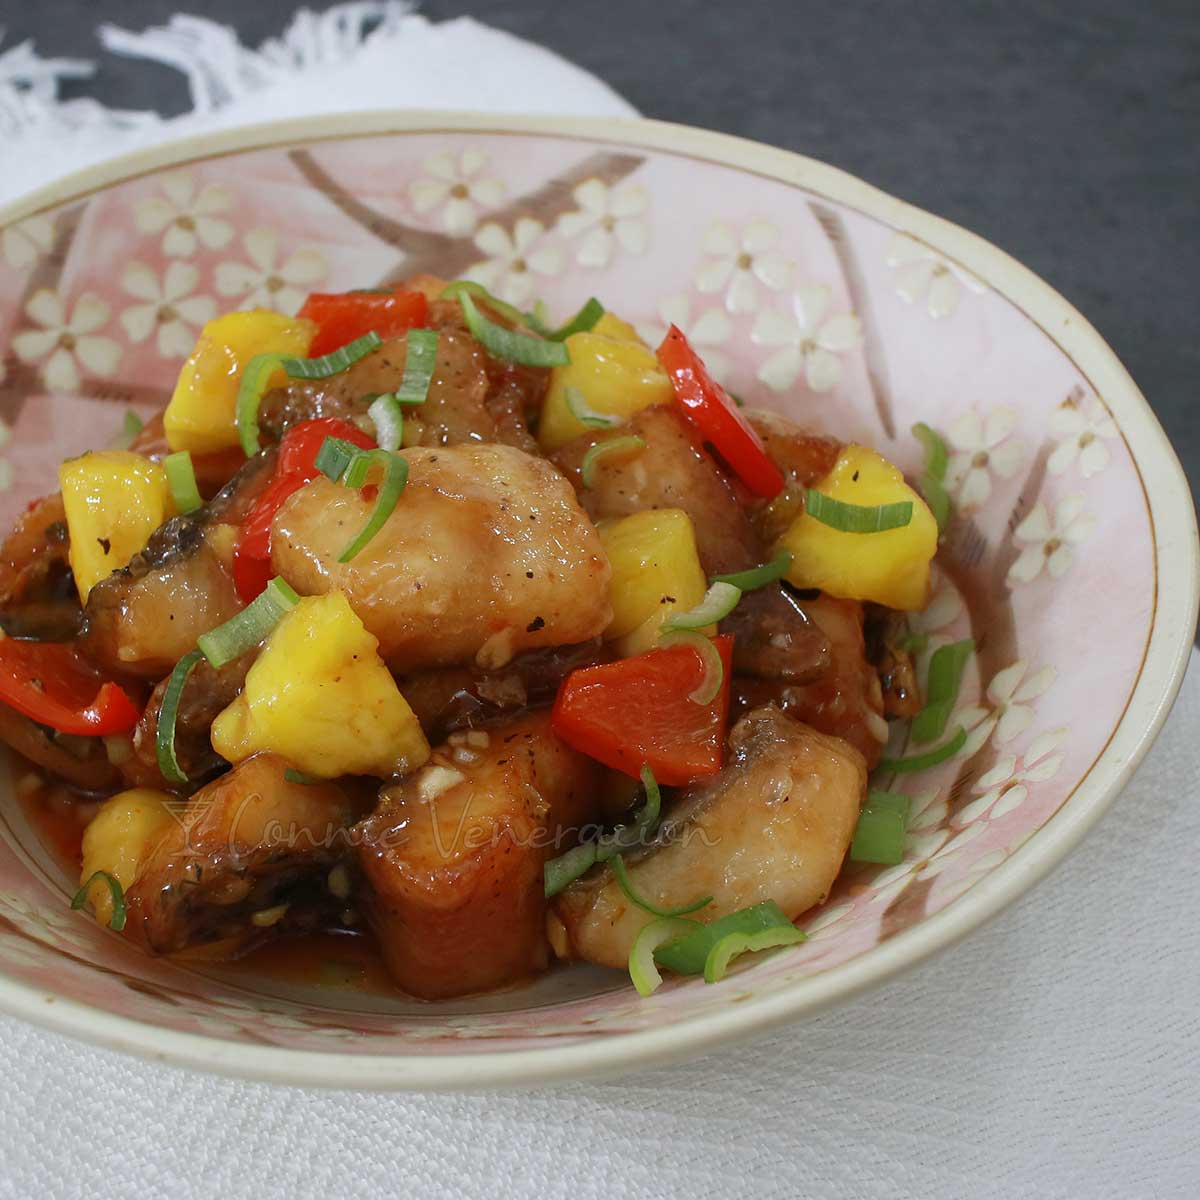 Sweet and sour tilapia fillets with bell pepper, pineapple and scallions